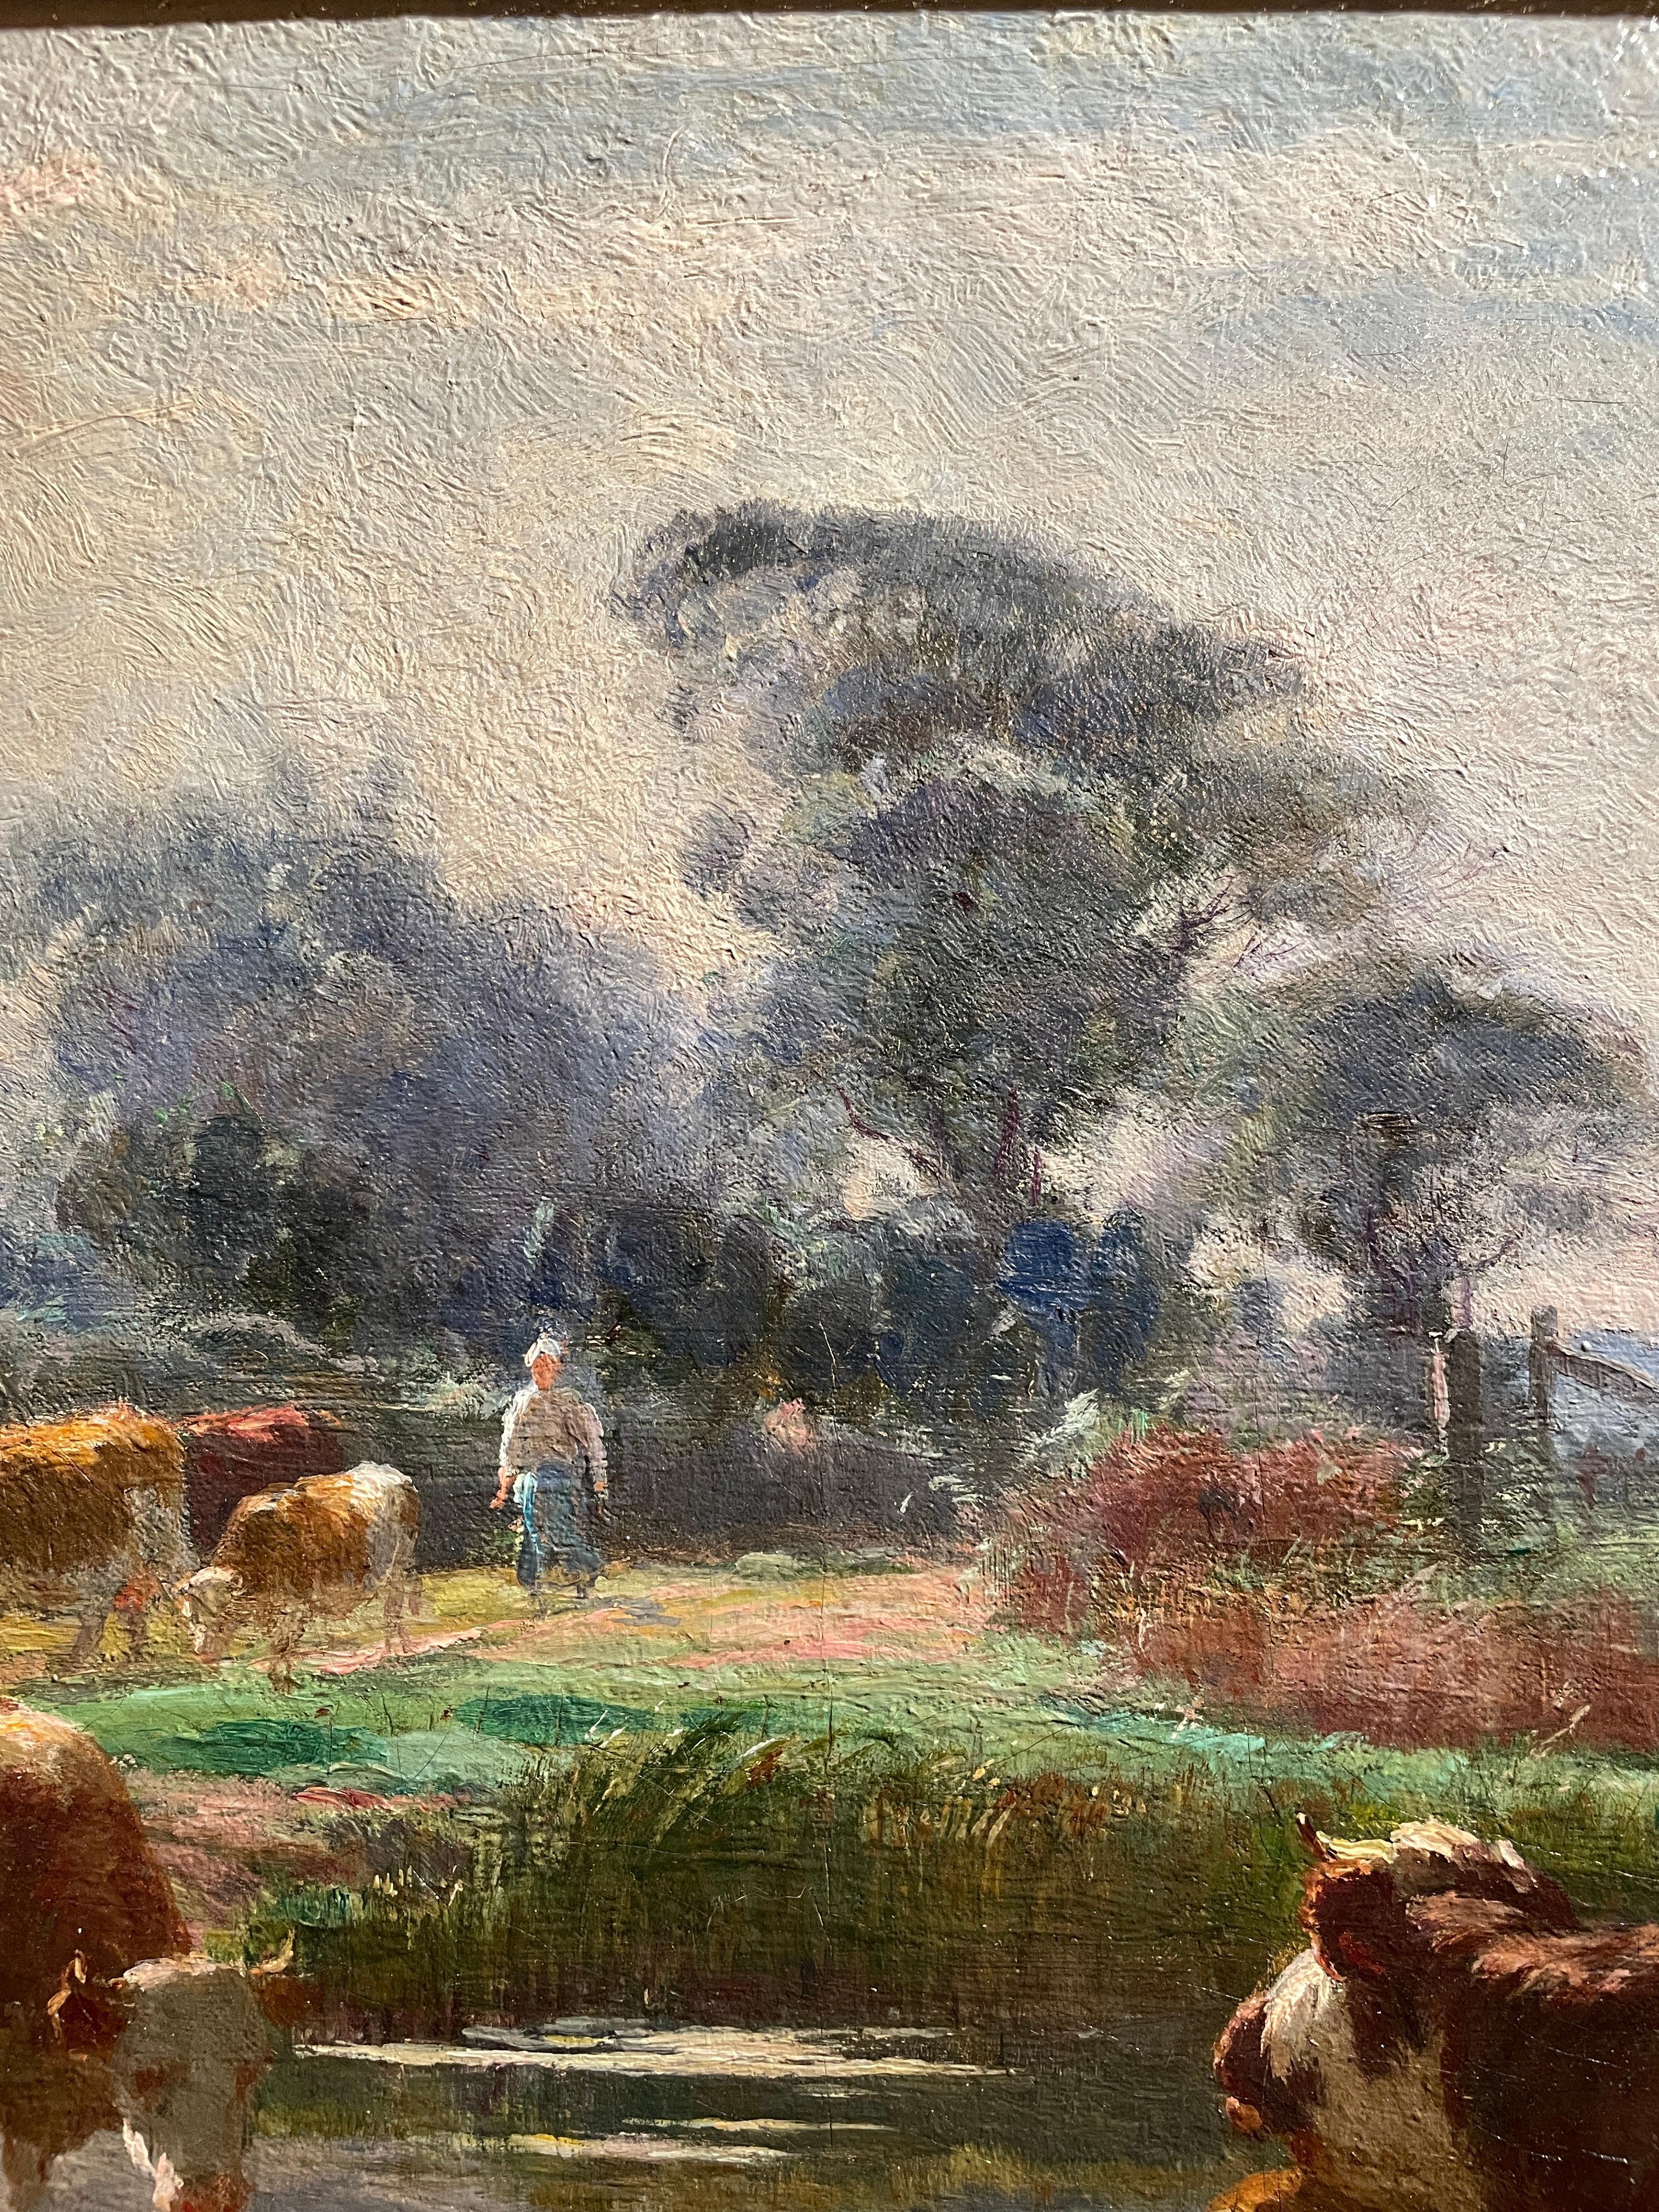 Wood Antique French Oil on Canvas Landscape Painting Signed Léon Barillot, Circa 1890 For Sale